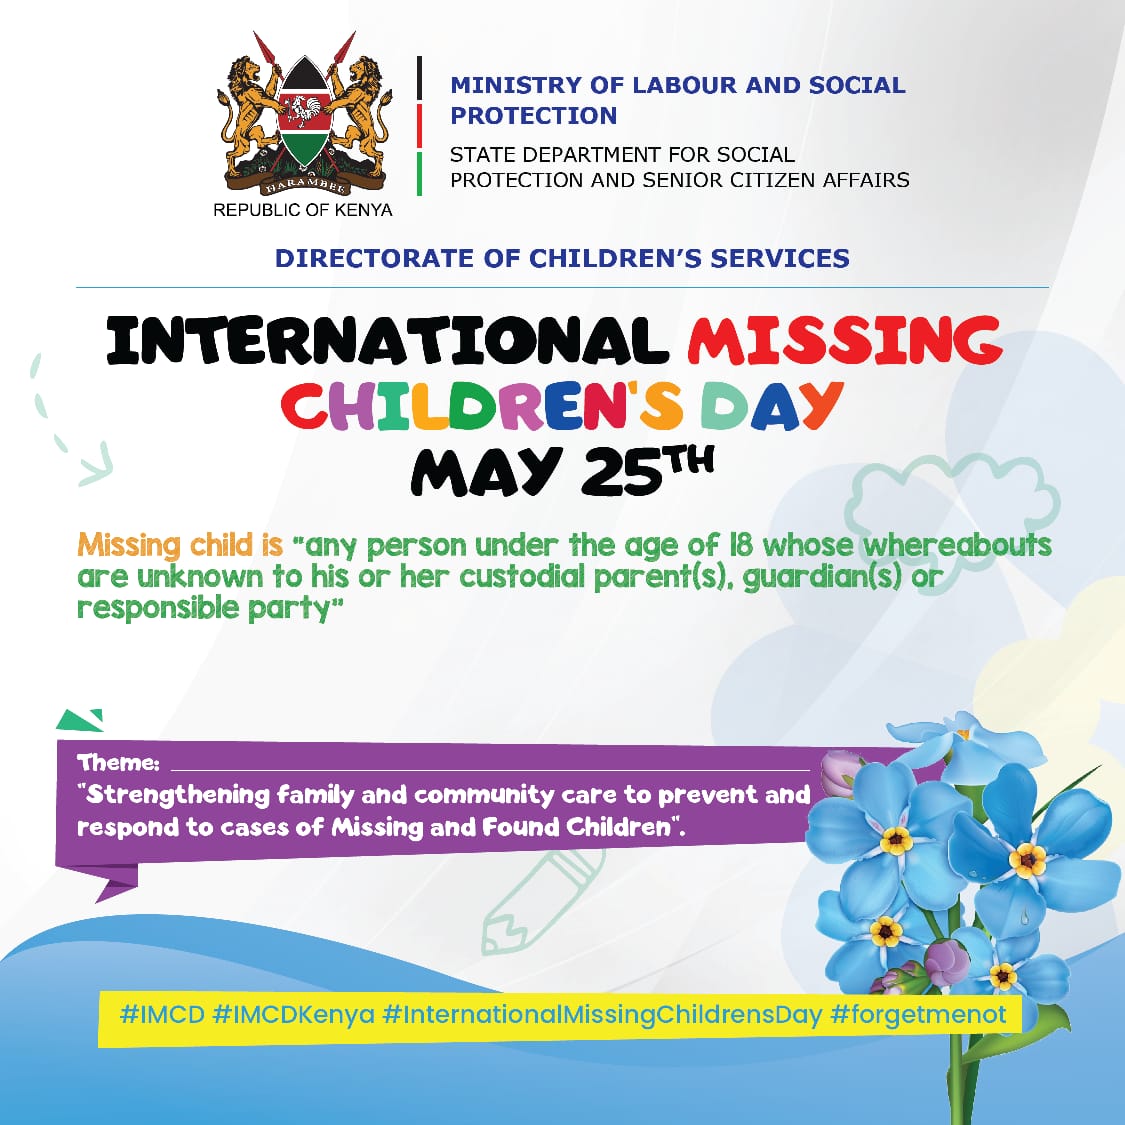 On 25th May we celebrate International Missing Children's day the; Theme will be strengthening family and community care to prevent and respond to cases of missing and found children @KenyaChildren @DCS_Kenya, @ICMEC_official , @missingchild_ke @joyndilinge